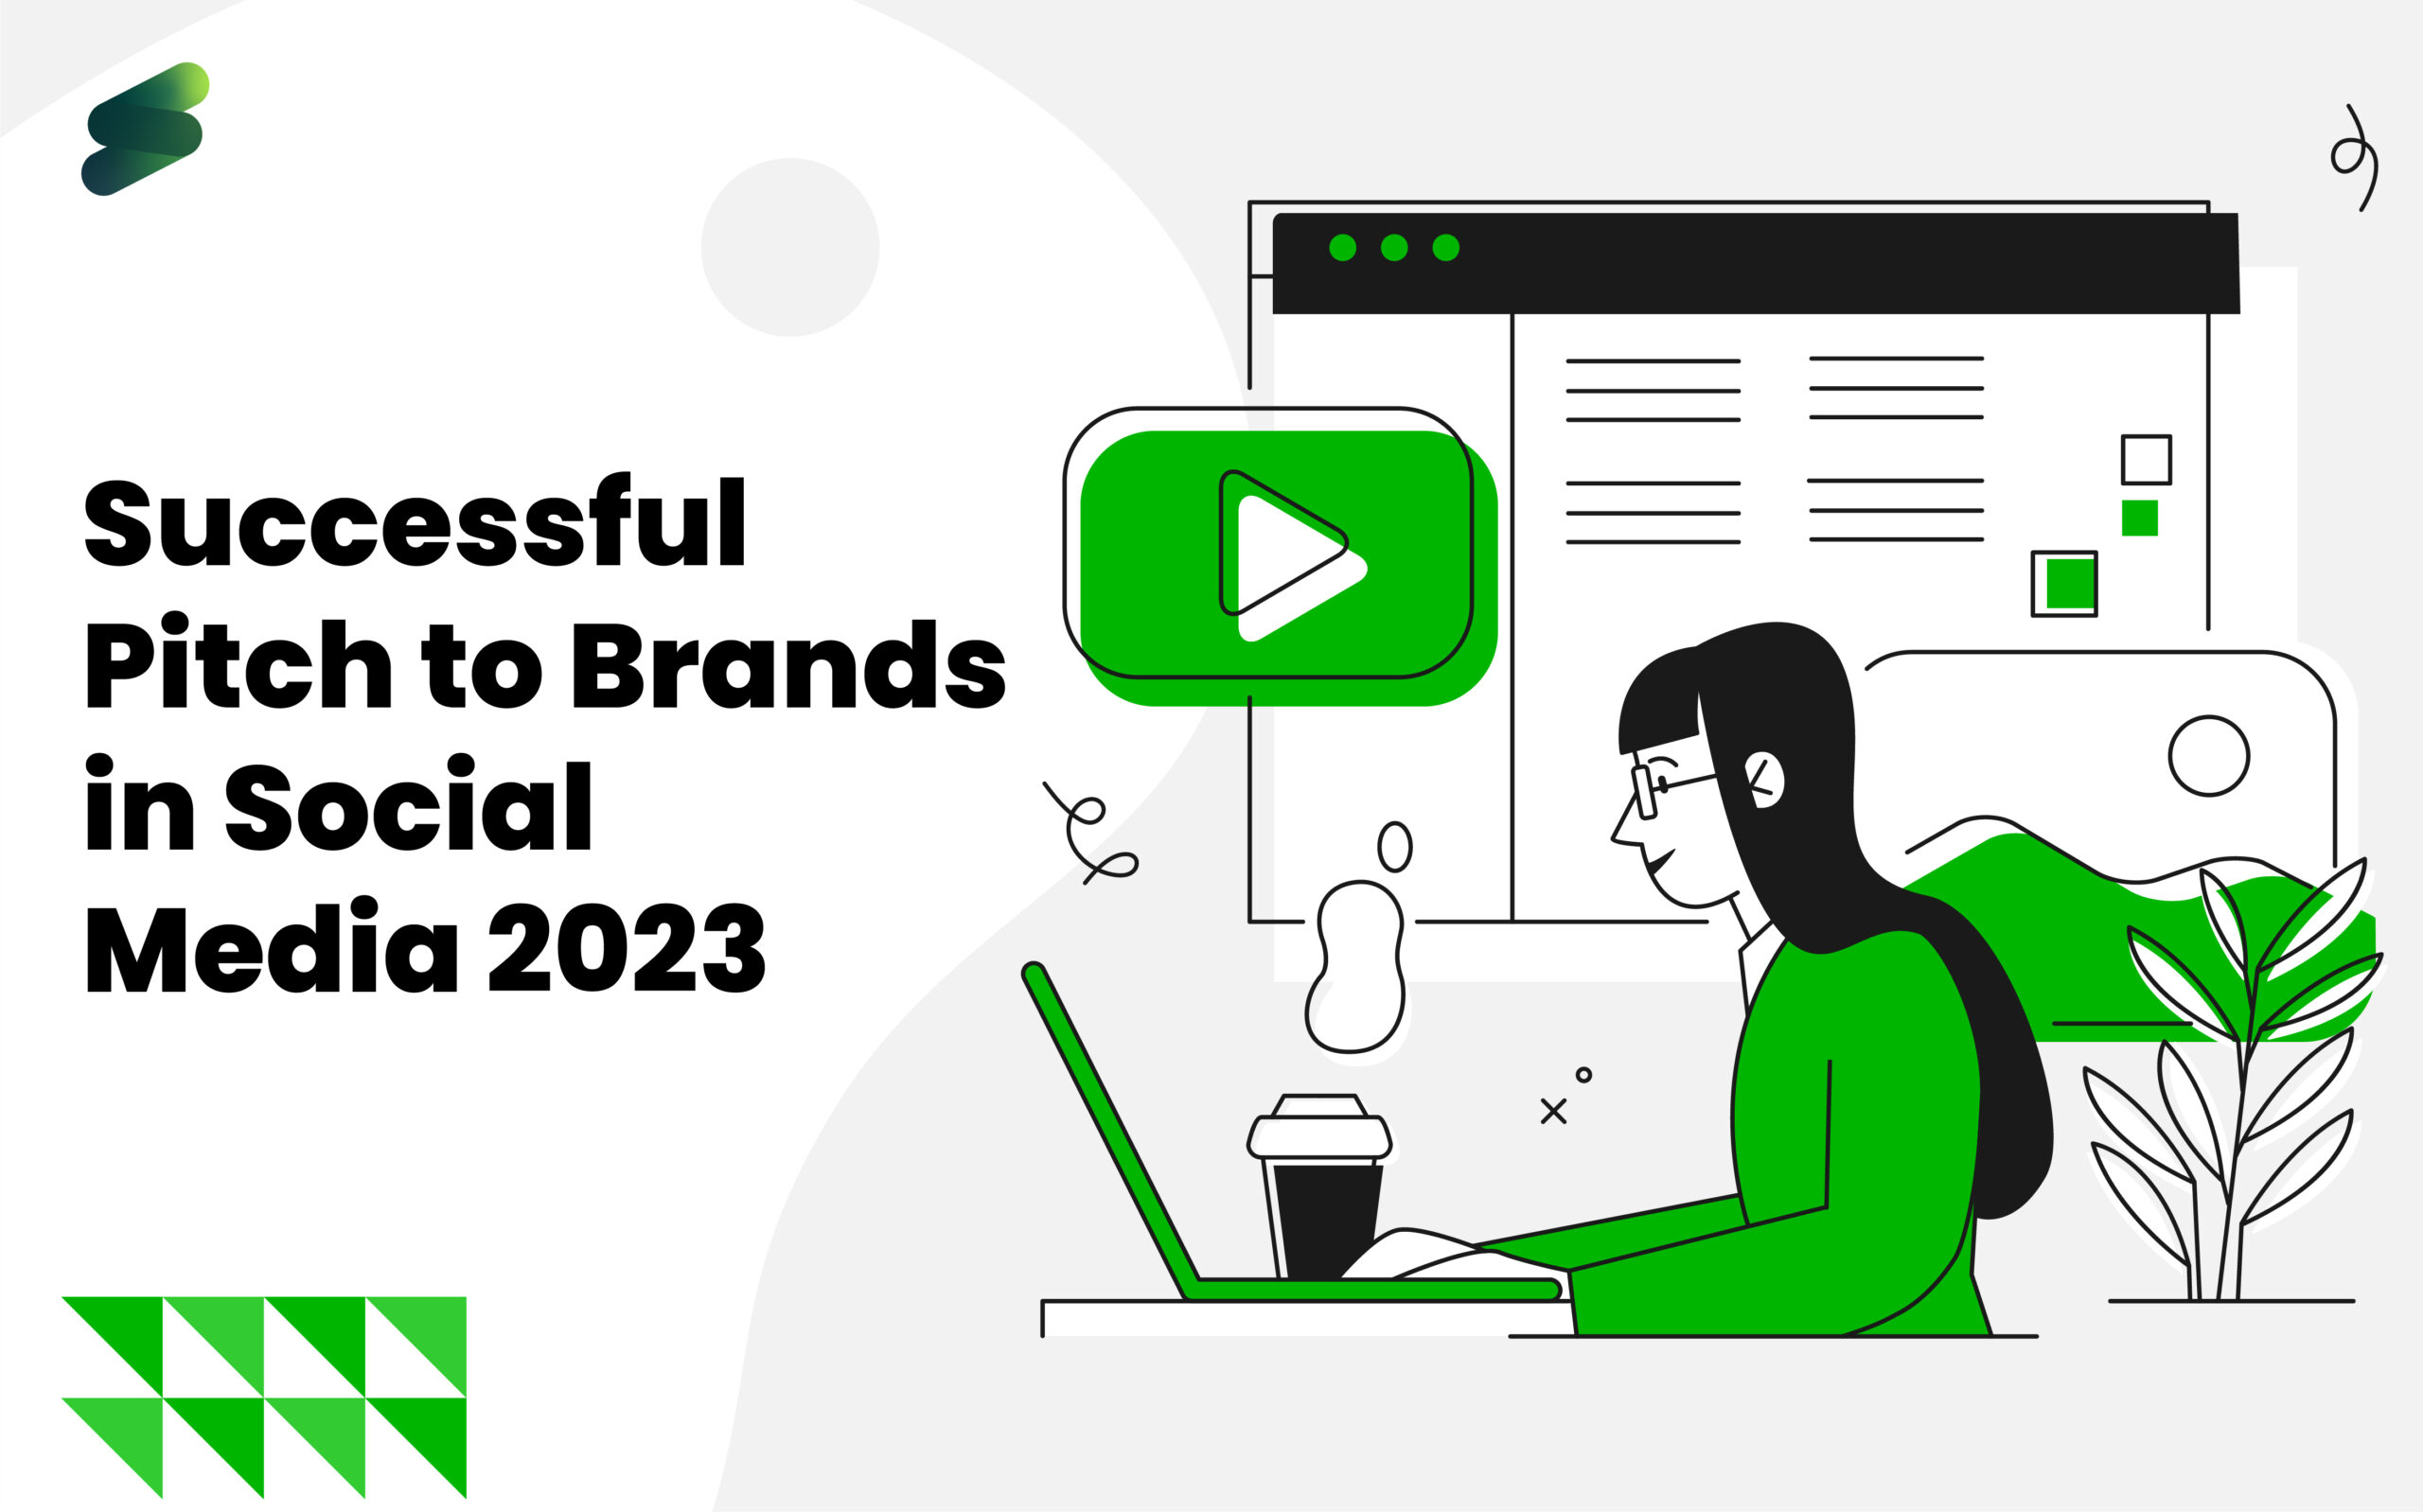 Tips for Creating a Successful Pitch to Brands in Social Media 2023